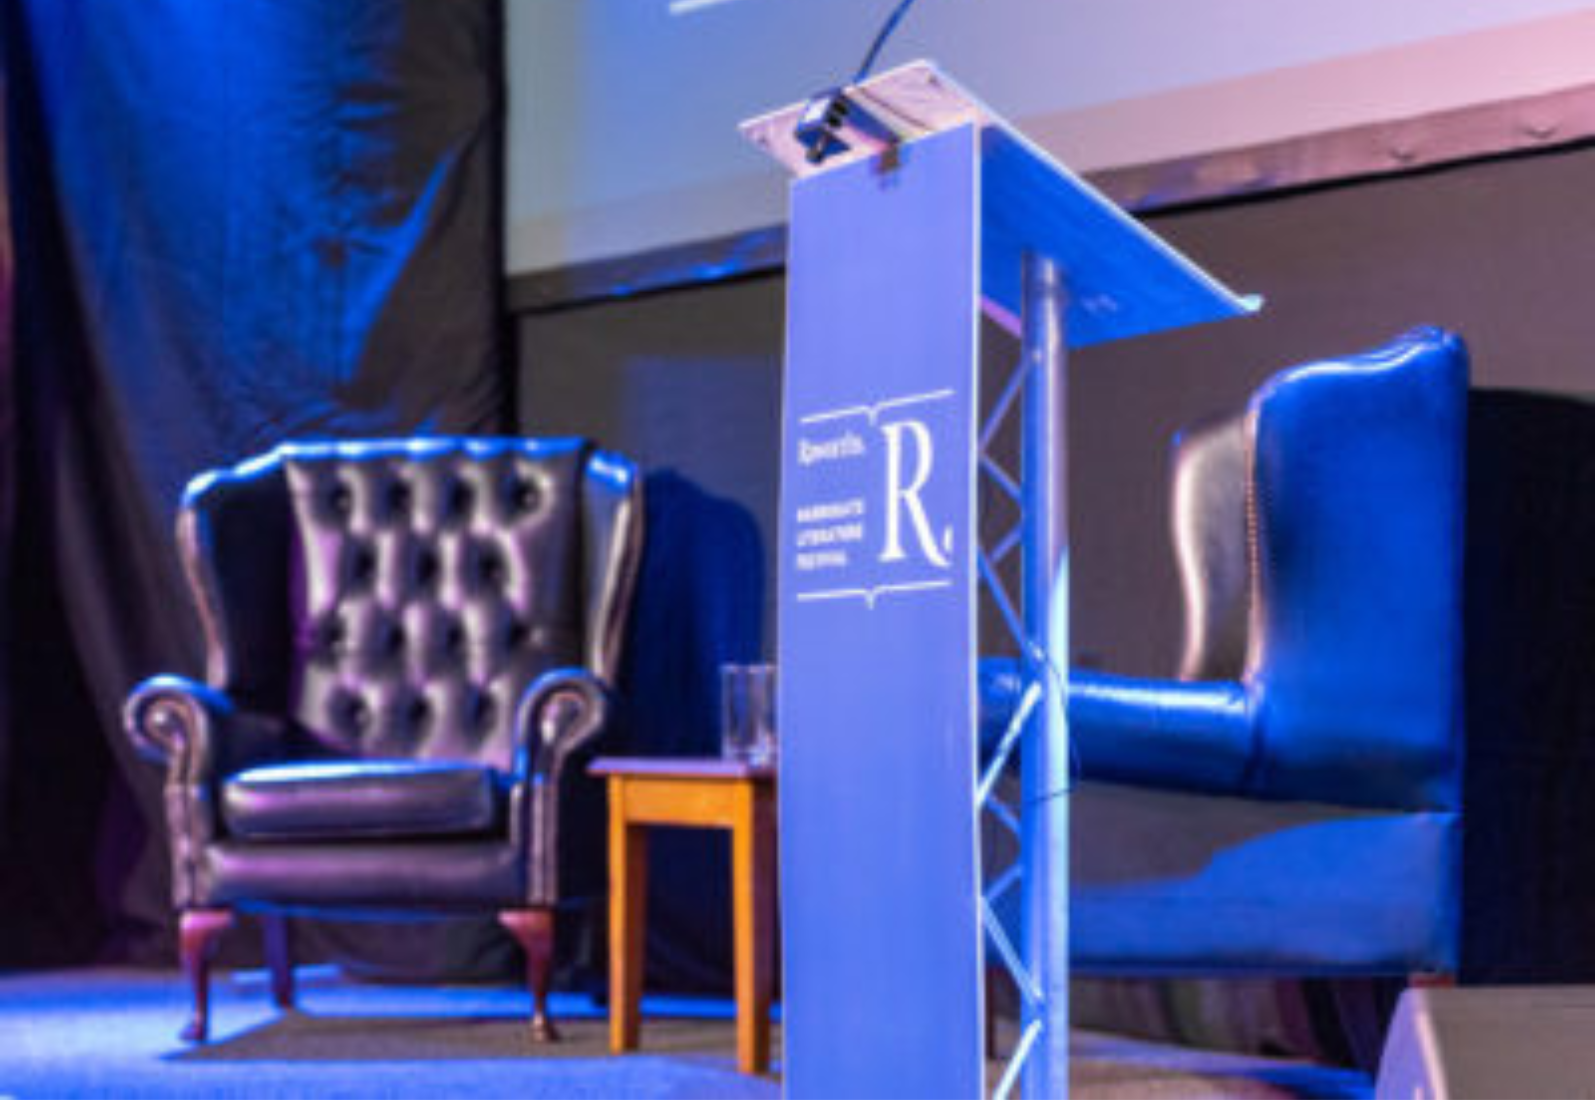 The stage is set for Raworths Harrogate Literature Festival